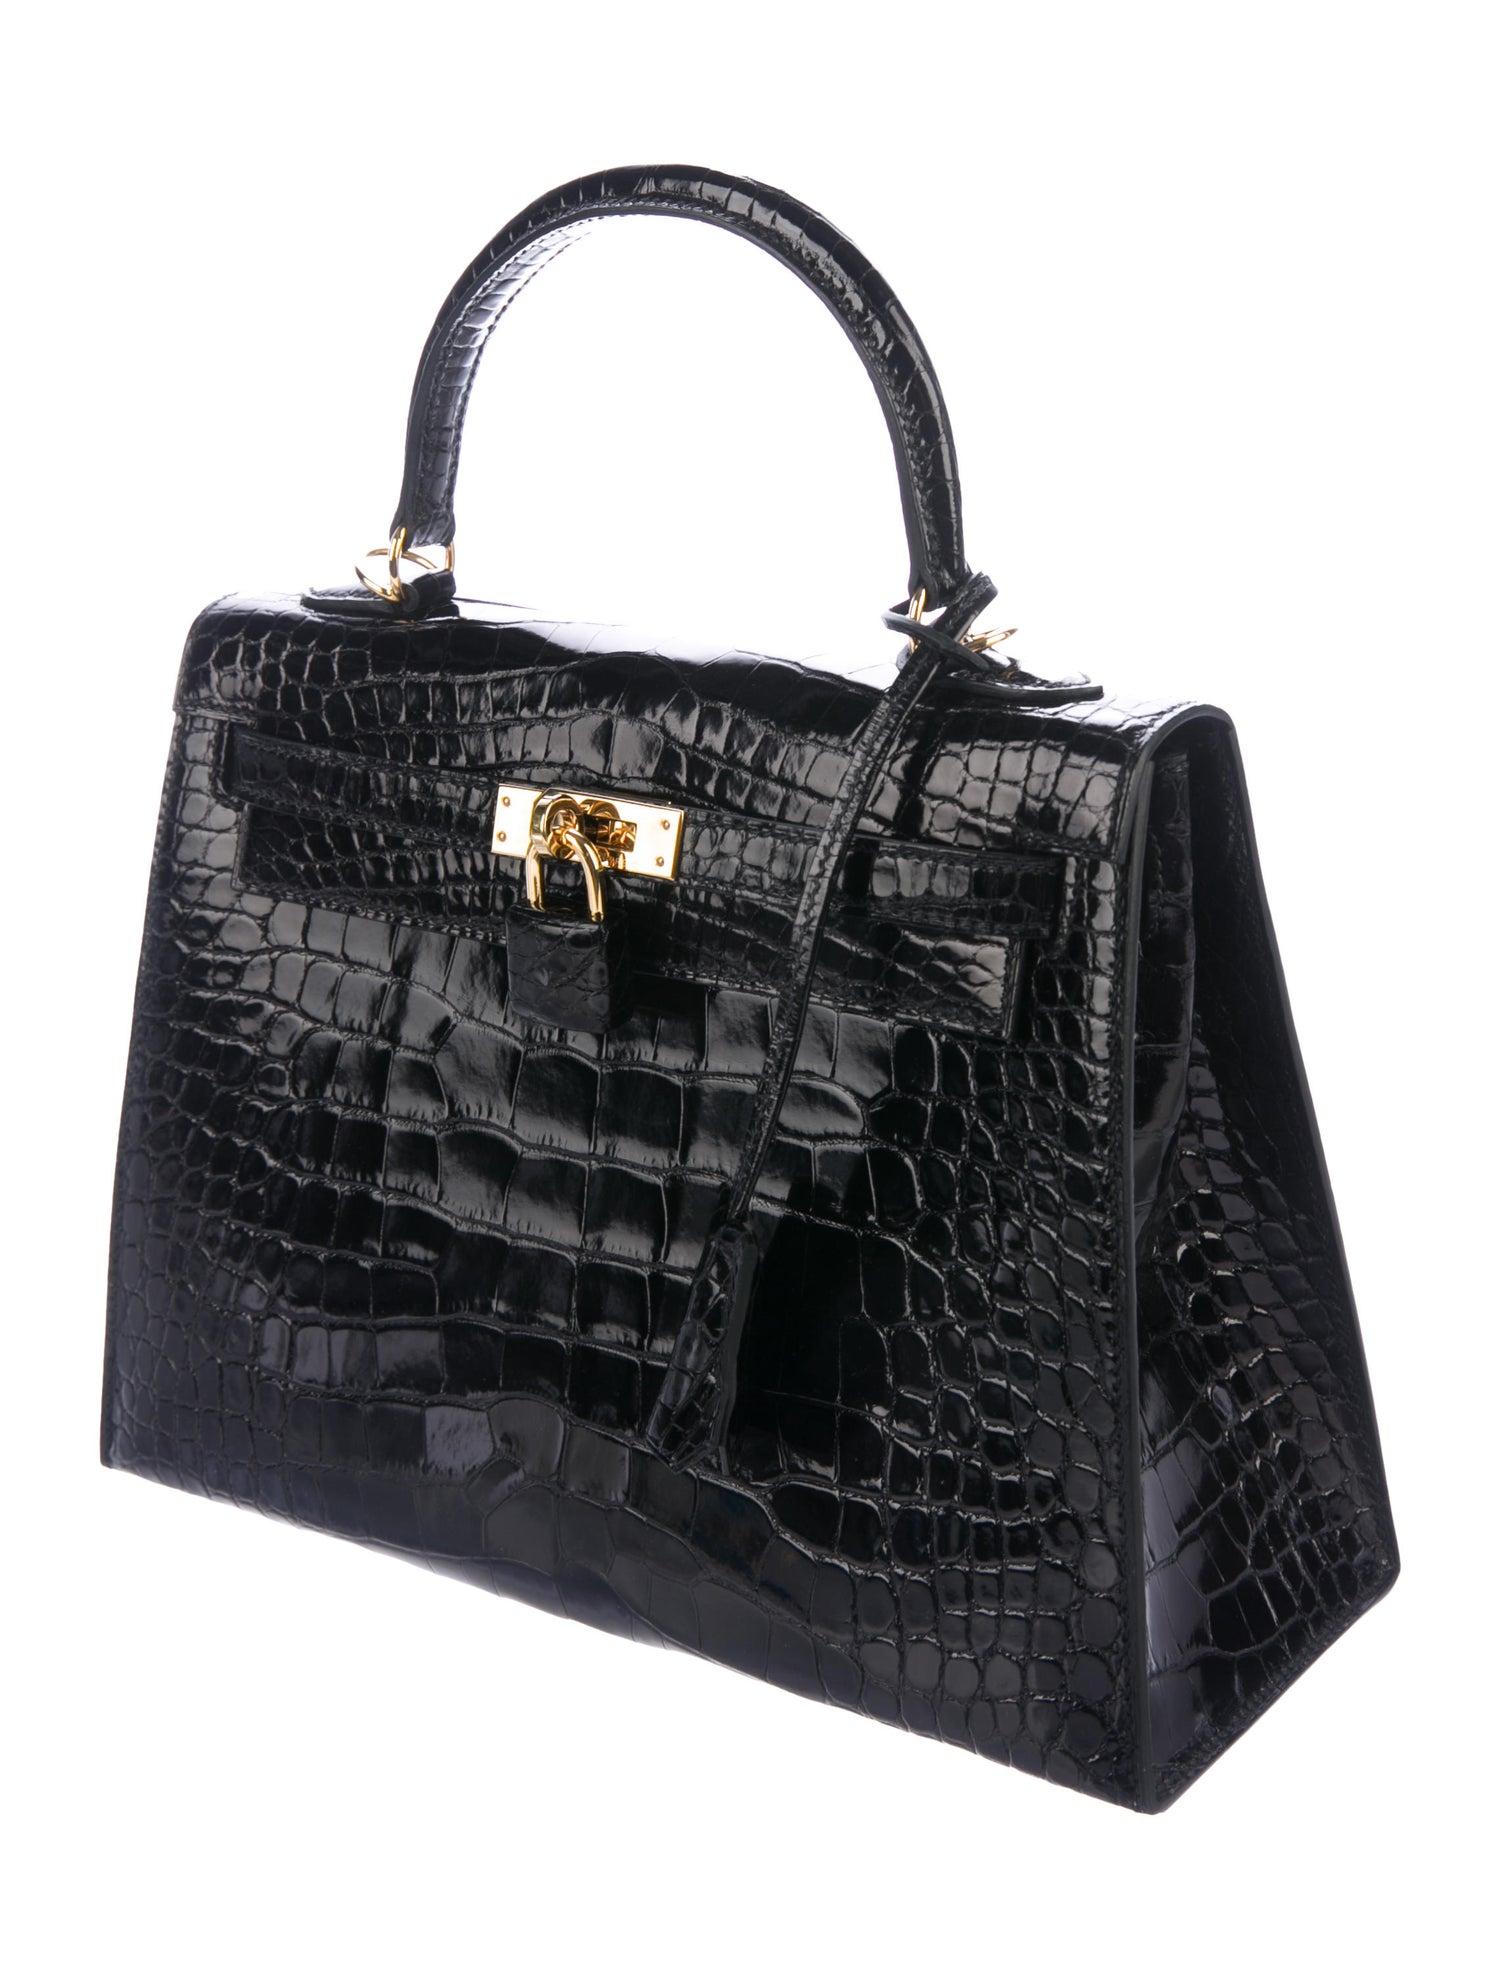 It Gets No Better Than This.

This rare Hermes Crocodile Kelly 25 bag is the ultimate status symbol for only the most serious of Hermes collectors. Crafted of exotic alligator skin leather in richly bold, black, this exclusive Hermes Kelly is brand